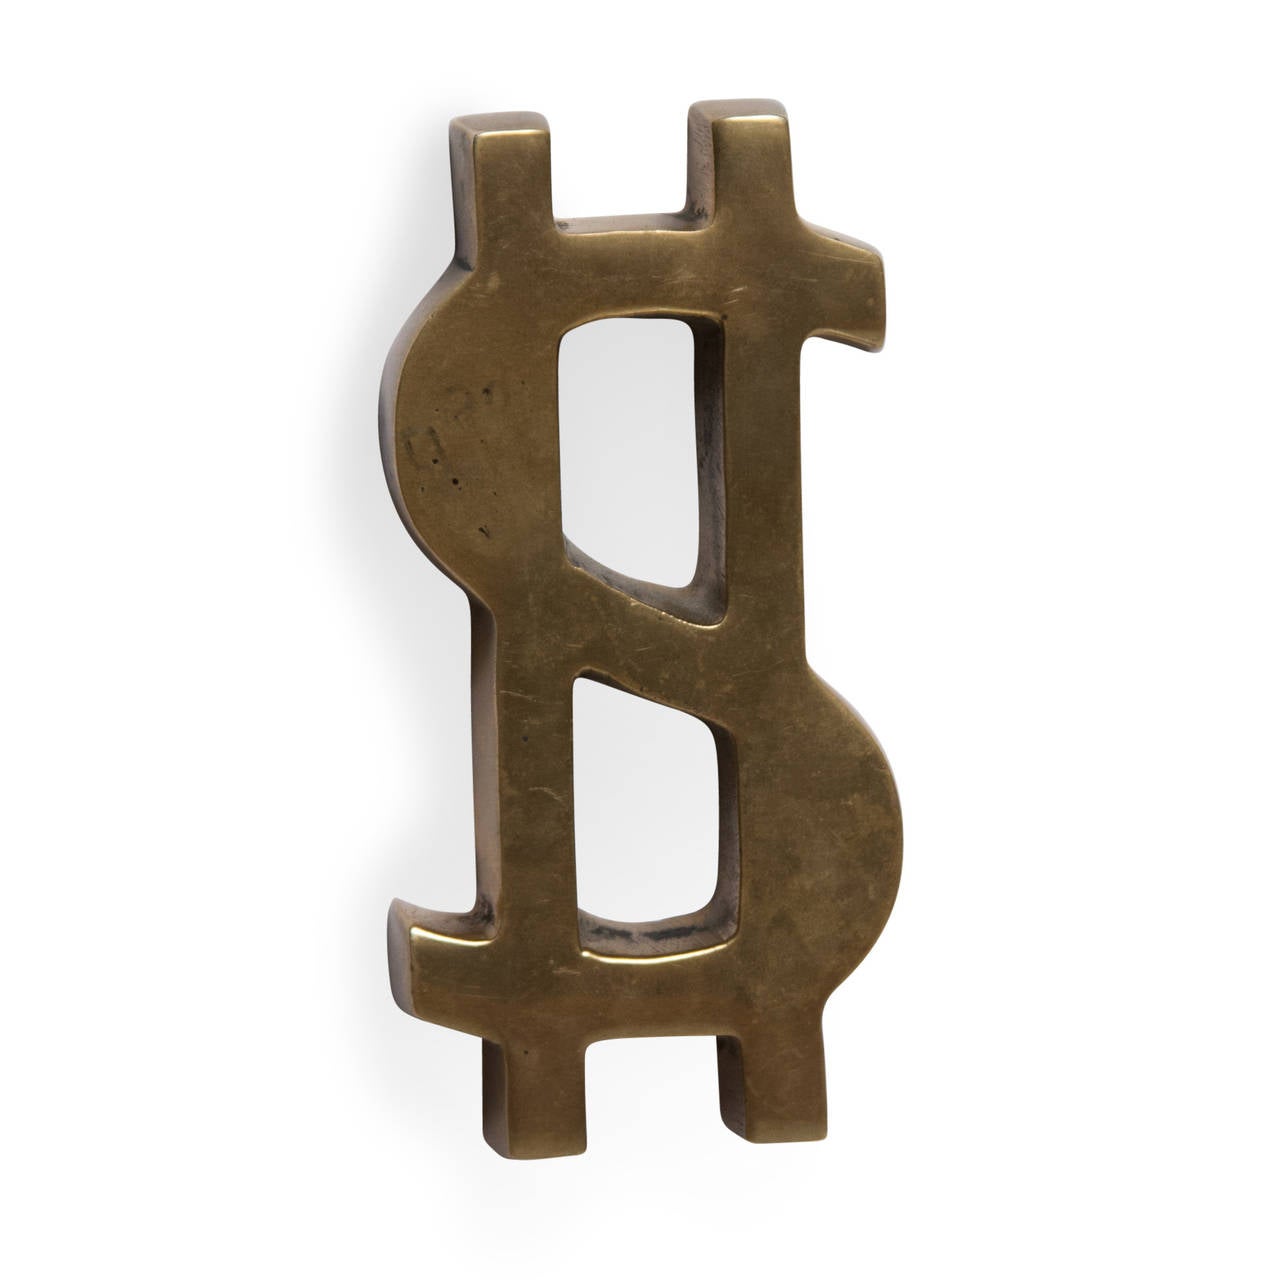 Solid bronze sculpture of a dollar sign, American, 1960s. 4 3/4 in x 2 1/2 in, height 1/2 in.